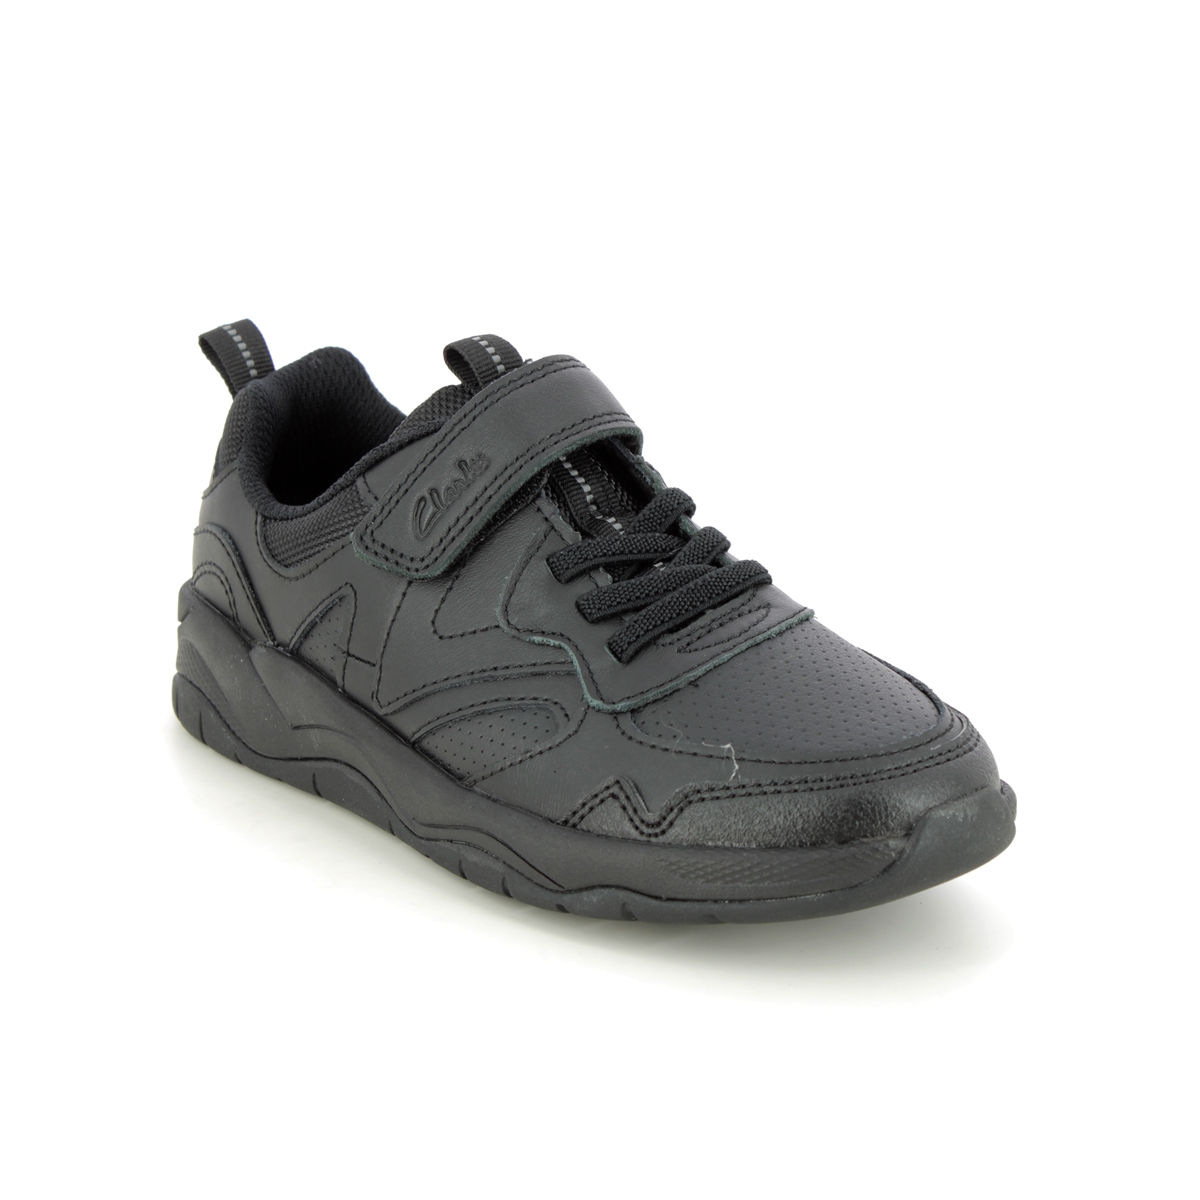 Clarks Clowder Sprint O Black Leather Kids Boys Shoes 661706F In Size 13.5 In Plain Black Leather F Width Fitting Regular Fit For School For kids